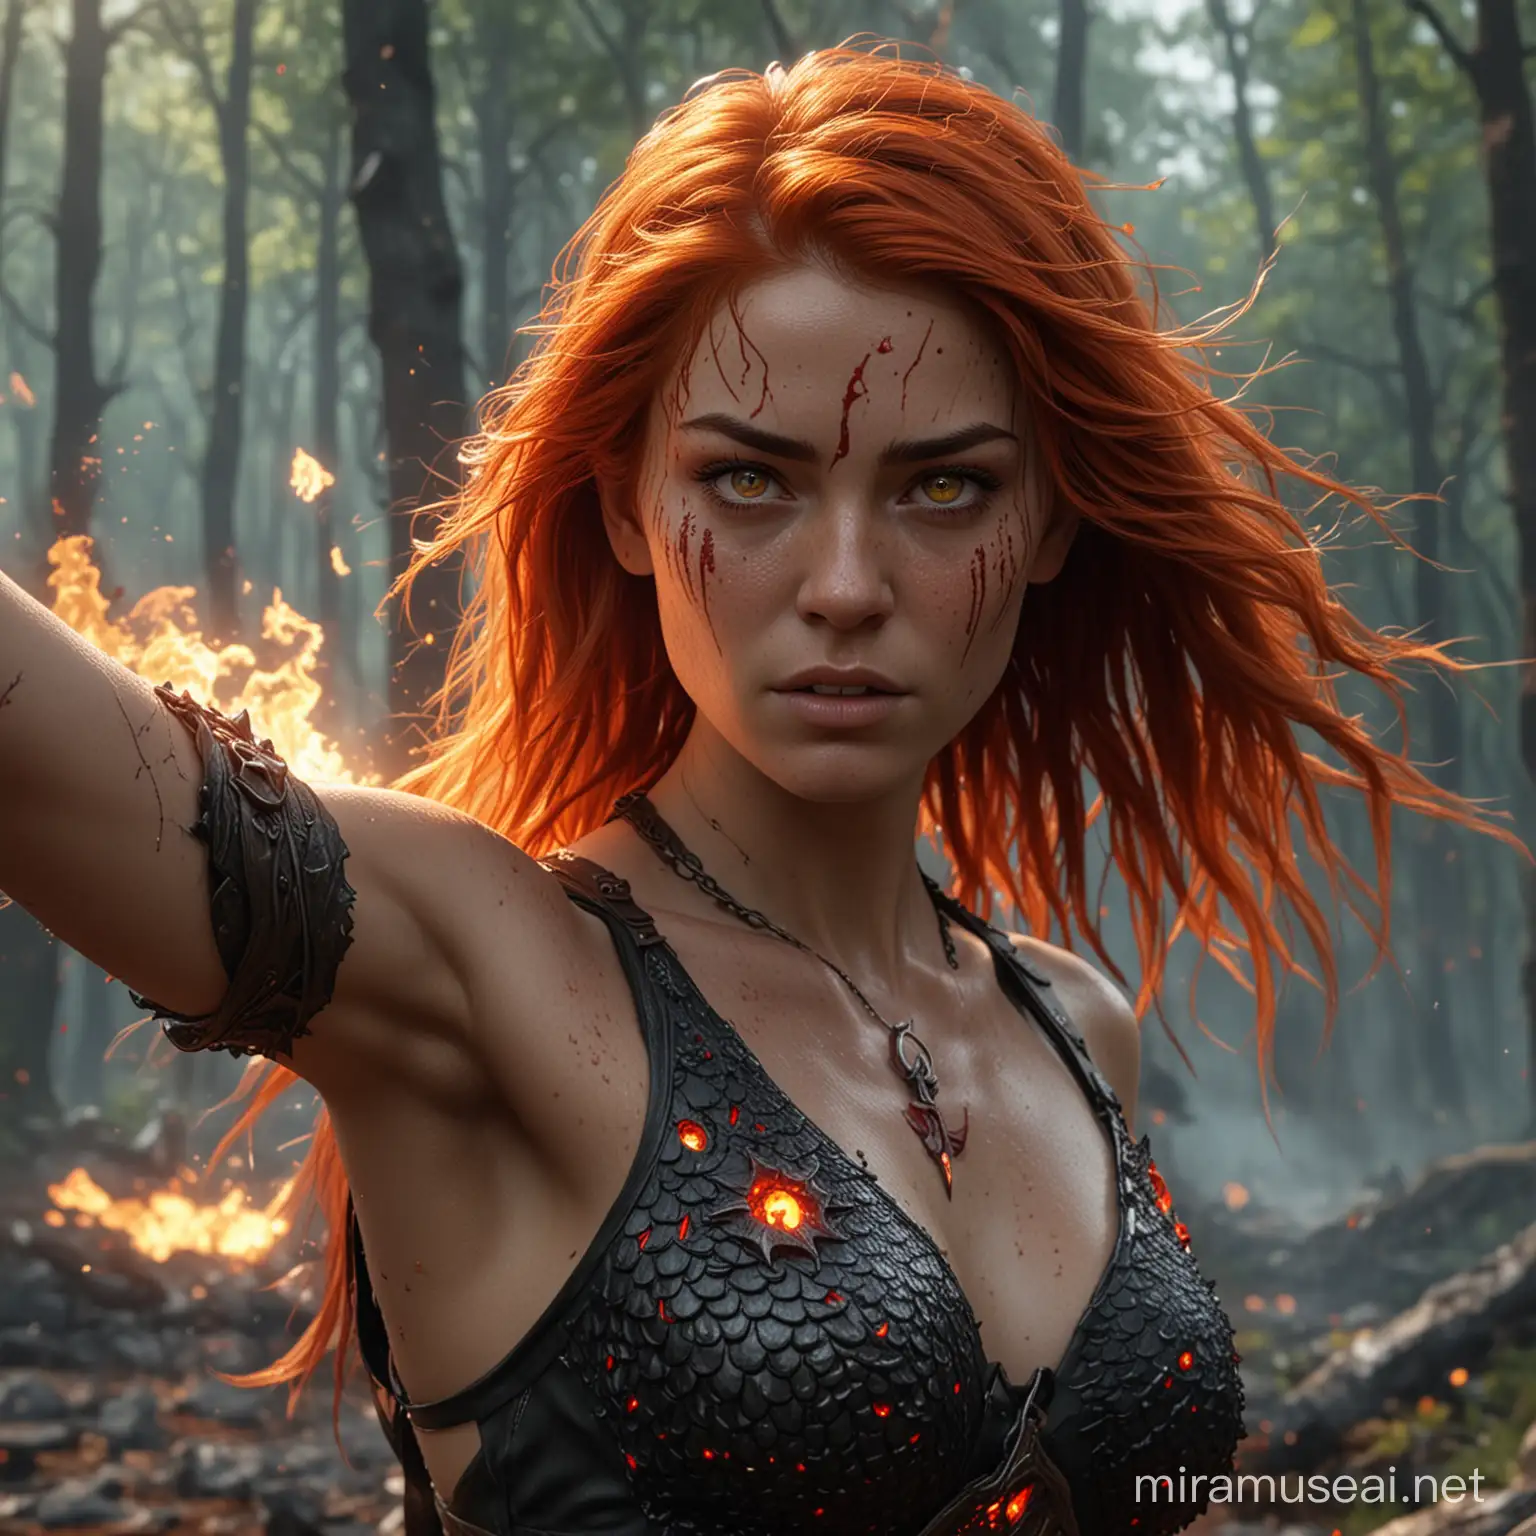 hyperrealistic very high detail 4k full size image taken from the front left, showing a female human with long fiery red hair thin red eyebrows, burning red eyes and face full of freckles, with draconic symbols carved into arms and body, sleeveless open front top made of dragon scales, fighting in a bloody battle in a forest throwing bolts of lightning from her hands